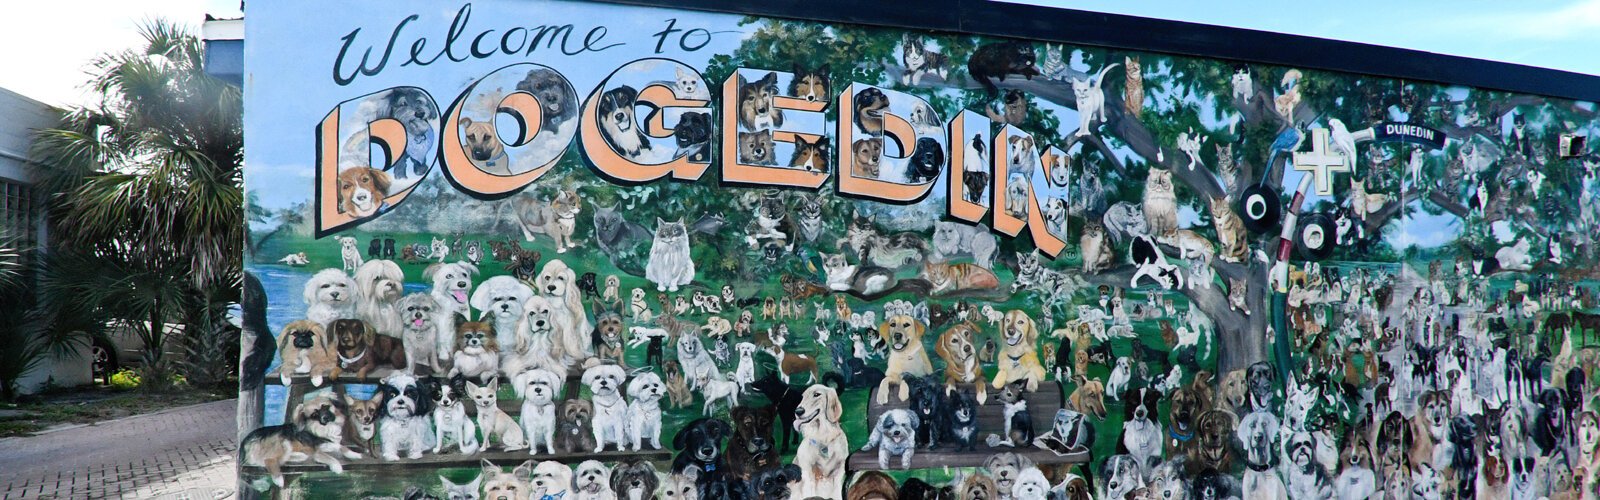 A “Welcome to Dogedin” mural greets visitors at Skip’s Bar & Grill in Dunedin, vouching for the city’s strong pet-friendly reputation that earned it the nickname Dogedin.